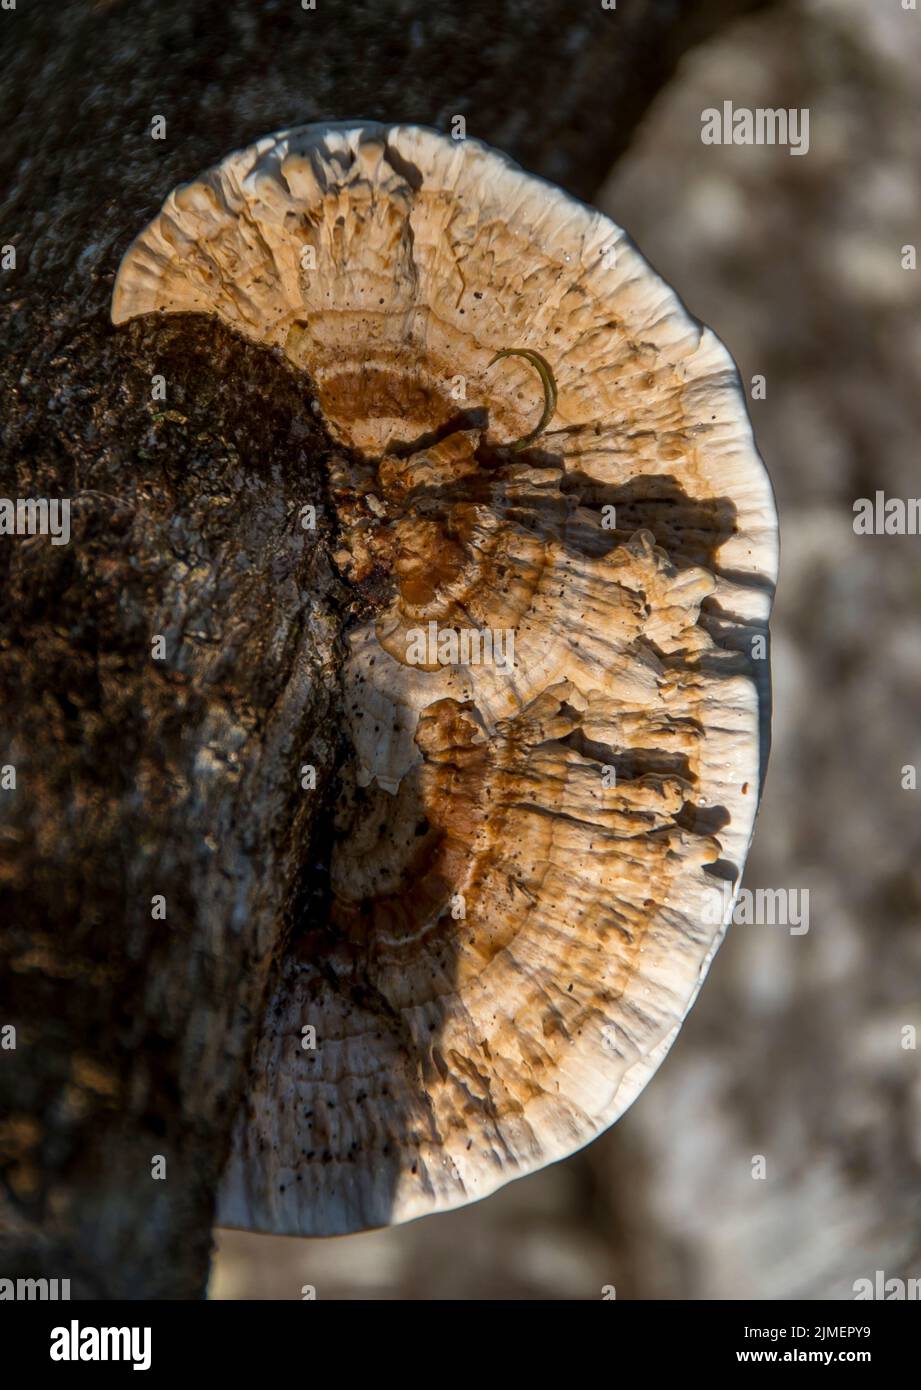 Australian fungus, trametes versicolor, Turkey Tail growing as a semi-circle on tree-trunk in Queensland, Shades of cream and light brown. Stock Photo